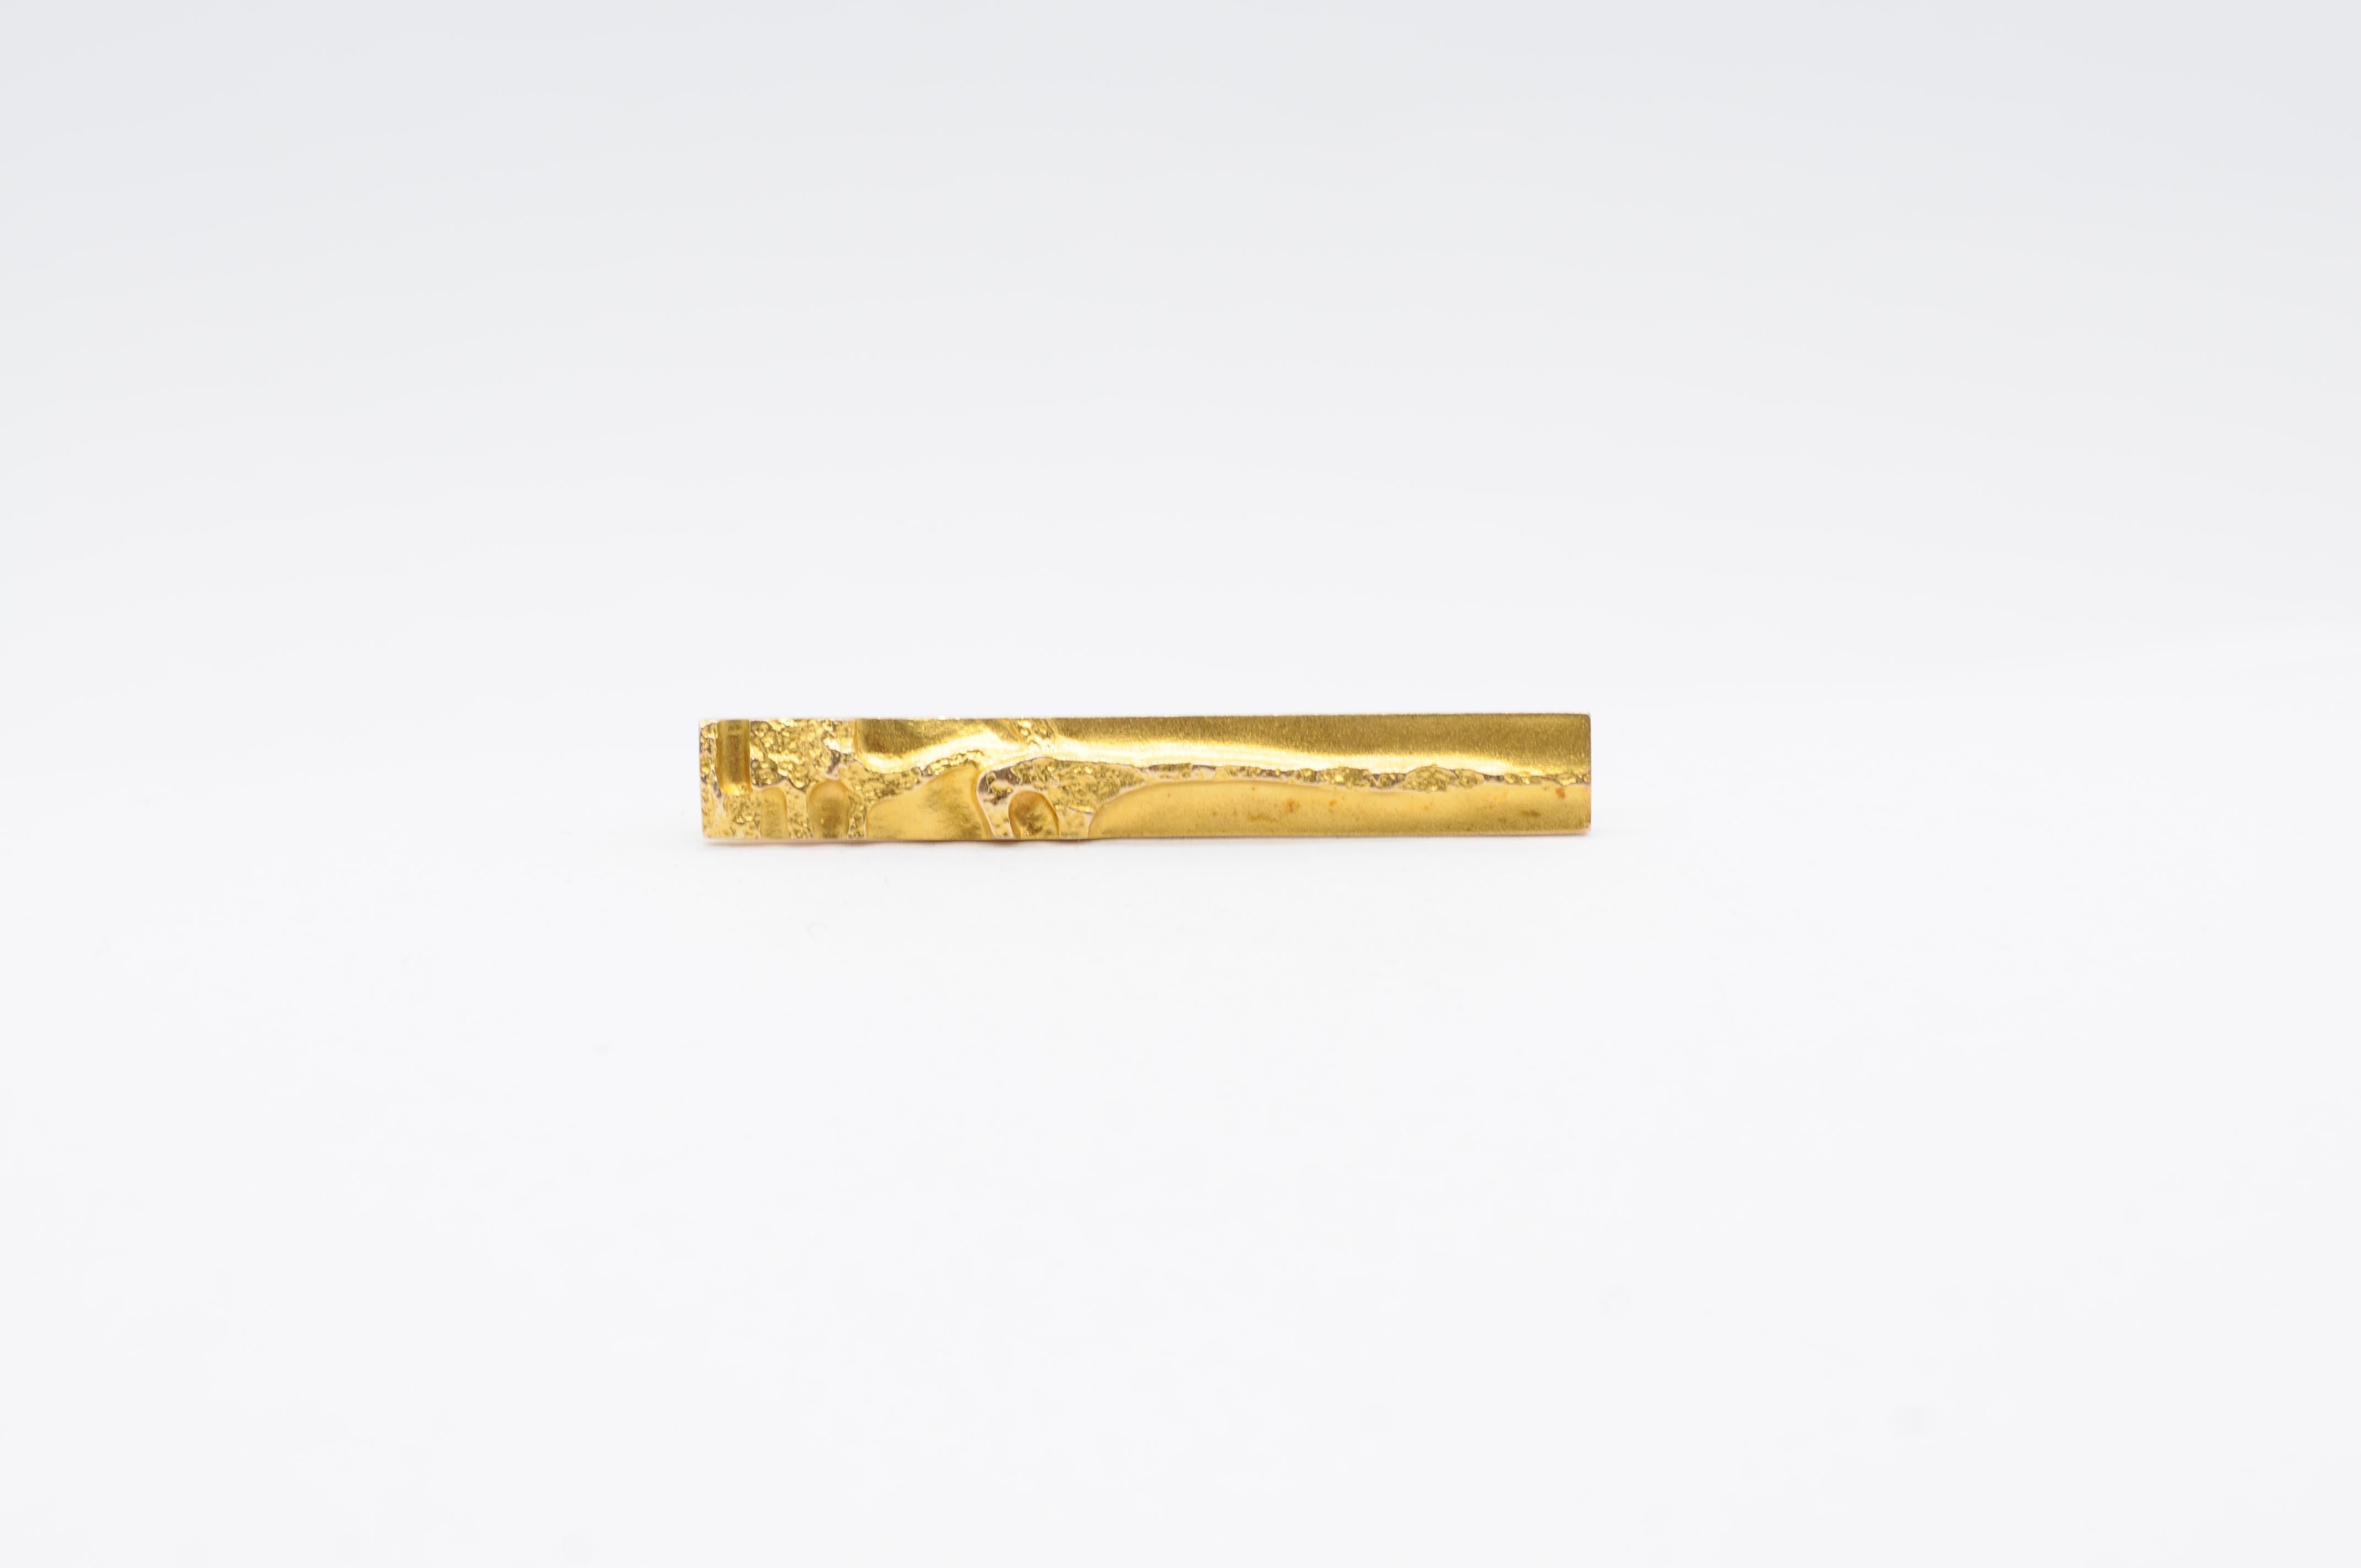 Indulge in the timeless elegance of Lapponia with this exquisite tie clip. Crafted by Lapponia, a renowned brand from Finland, this tie clip features a beautifully simple yet sophisticated design. Made from 18k yellow gold, it exudes a luxurious